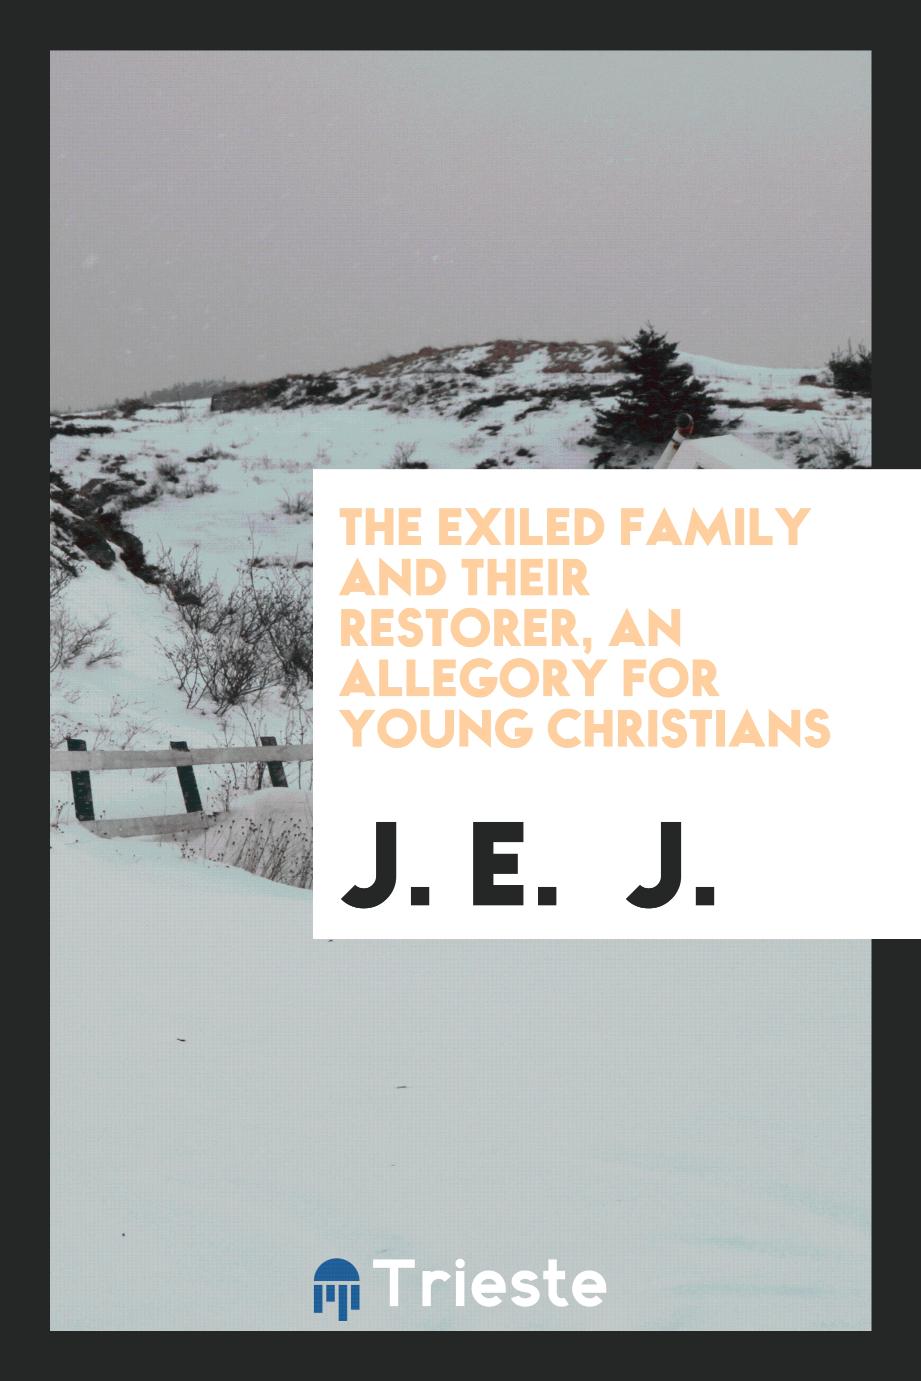 The exiled family and their restorer, an allegory for young Christians